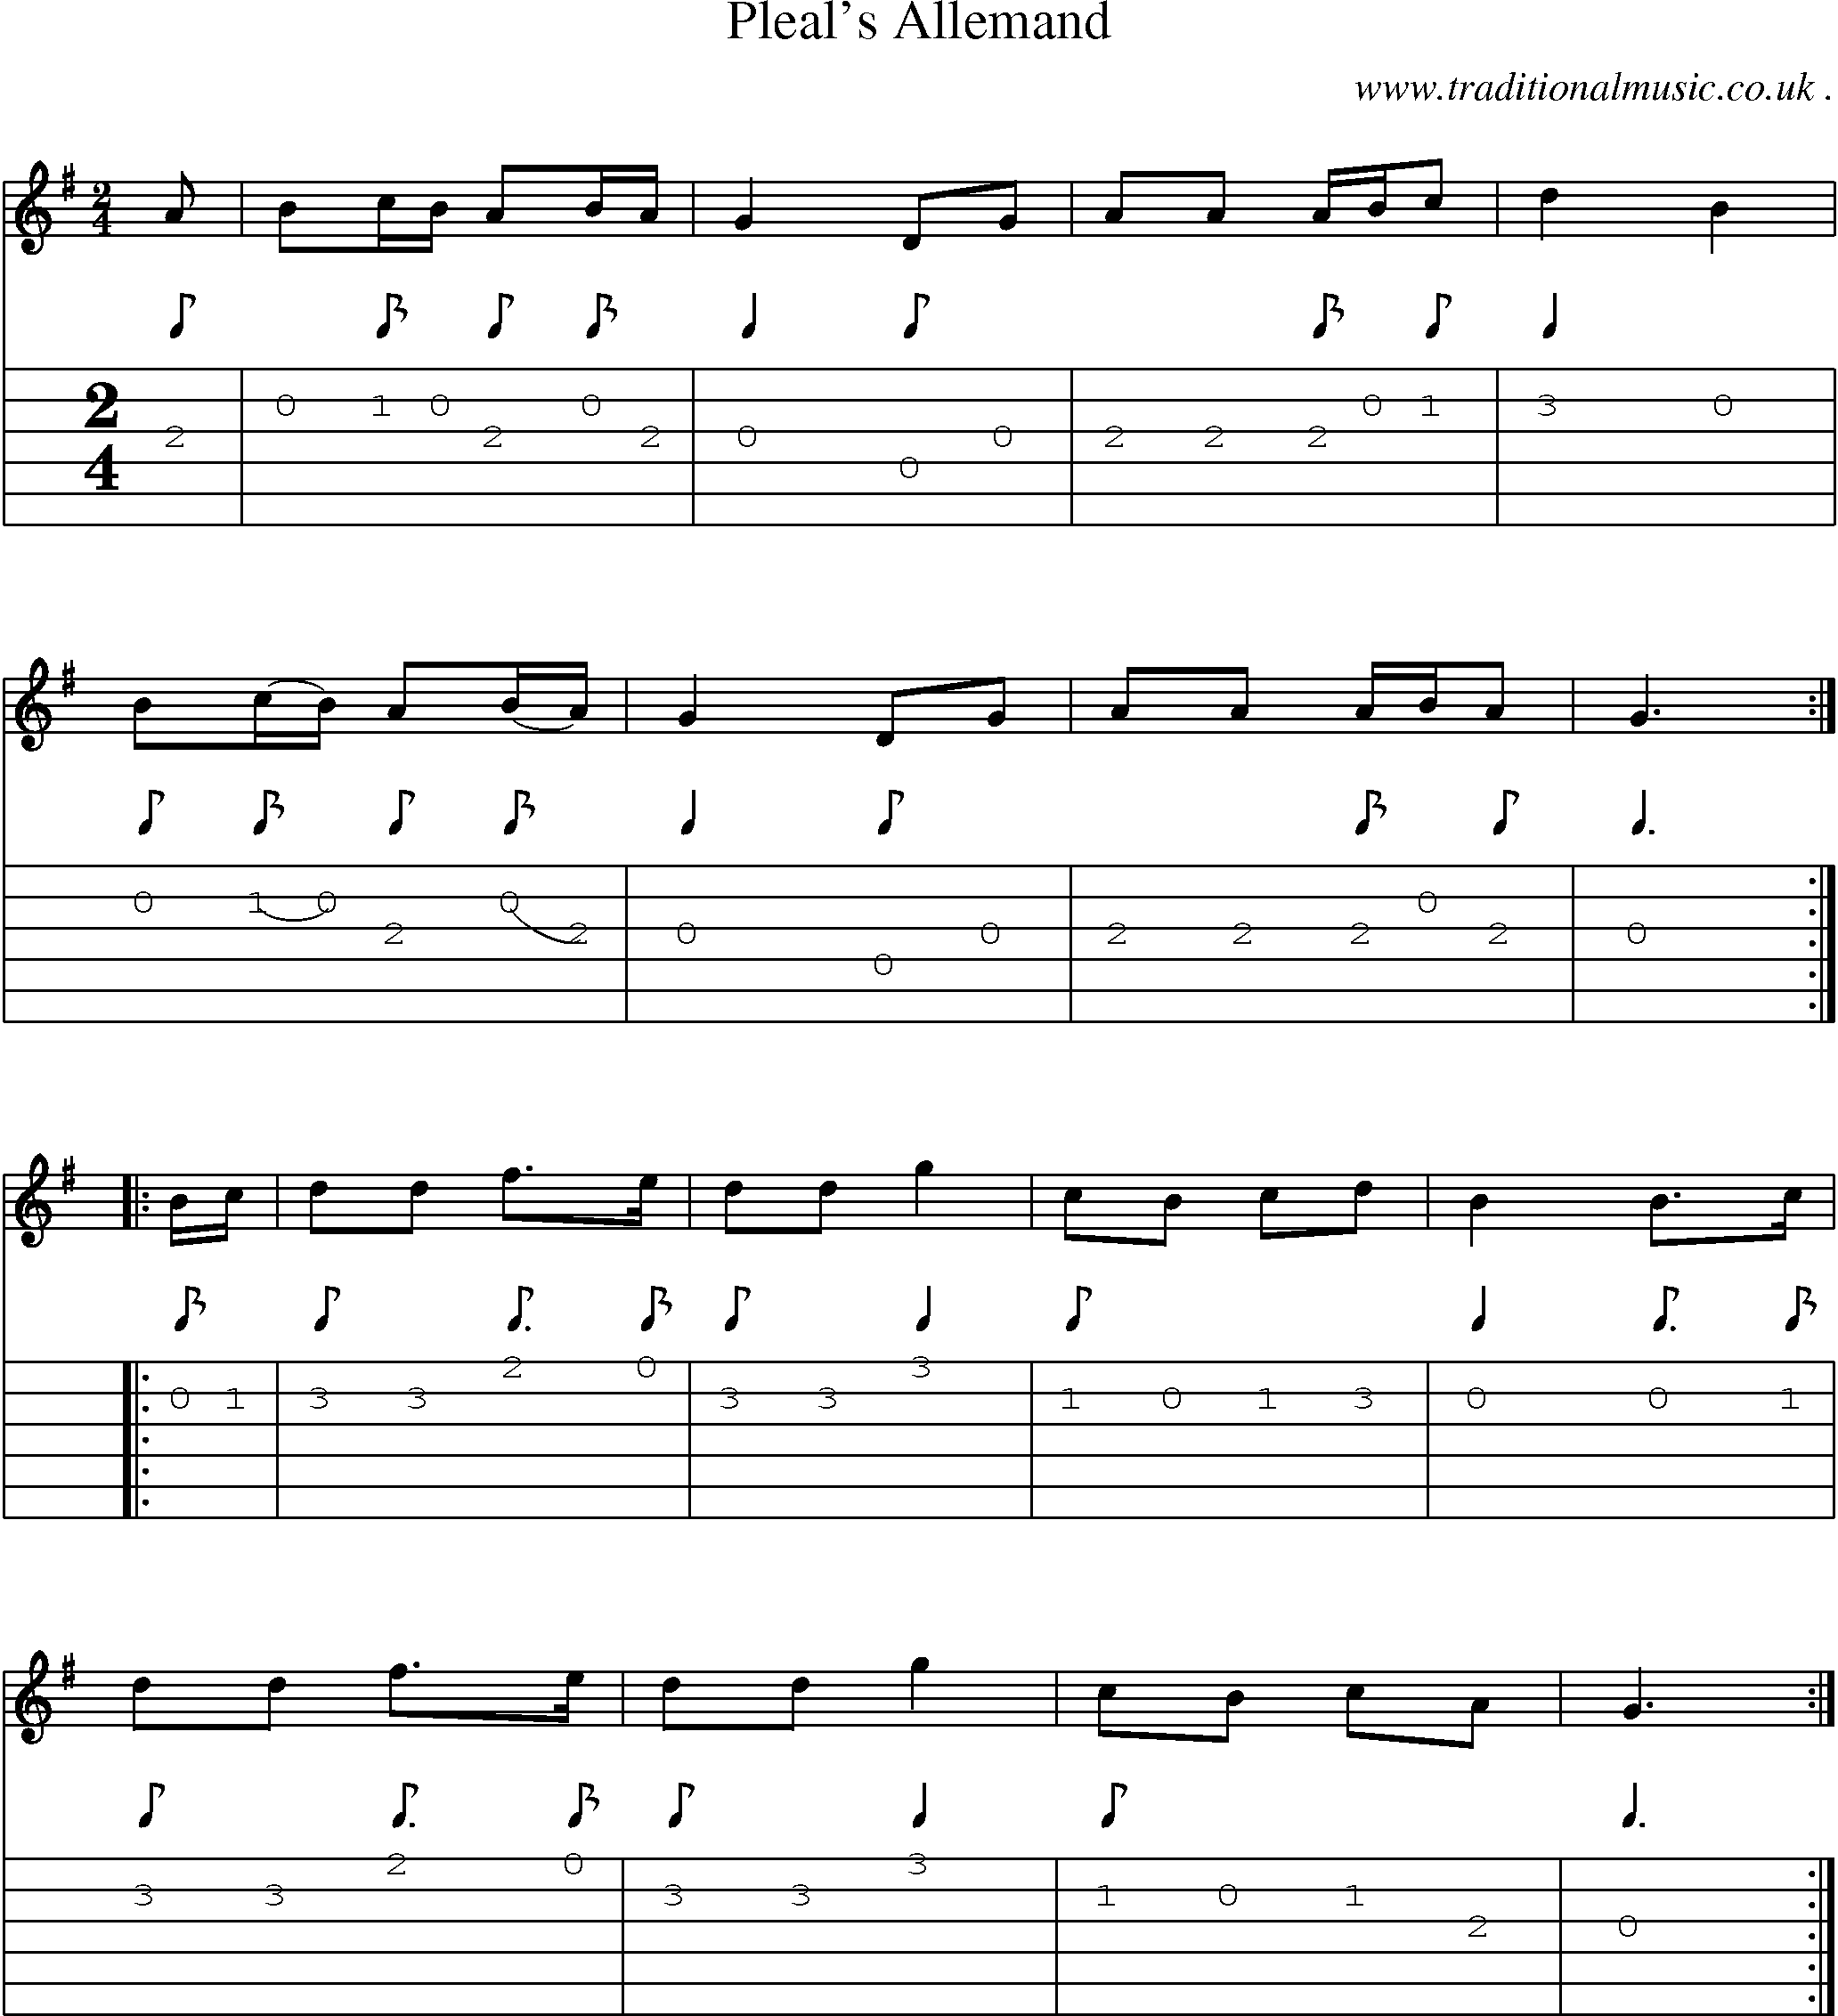 Sheet-Music and Guitar Tabs for Pleals Allemand